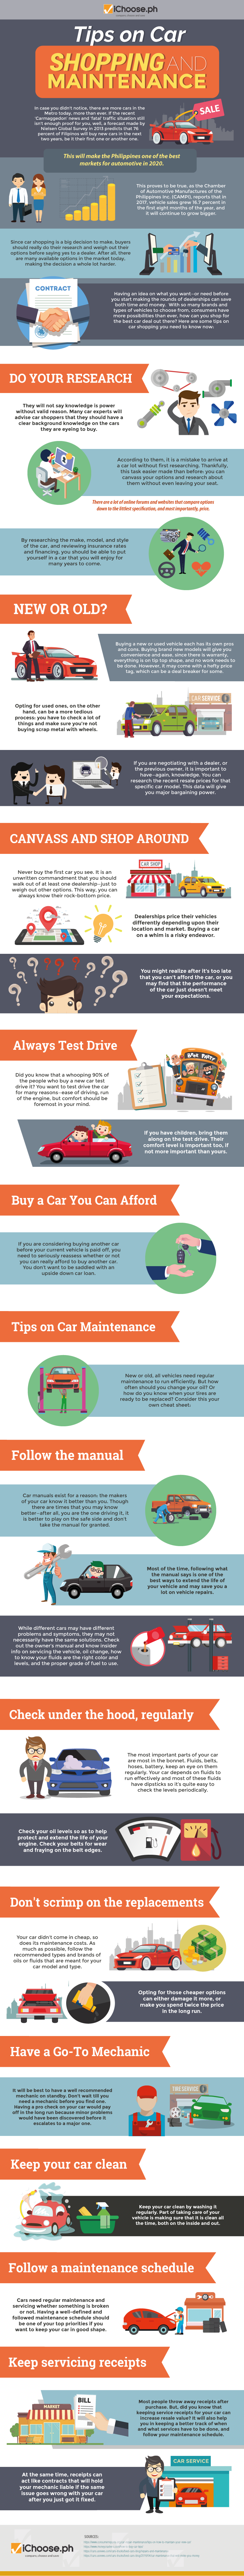 Tips on Car Shopping and Maintenance